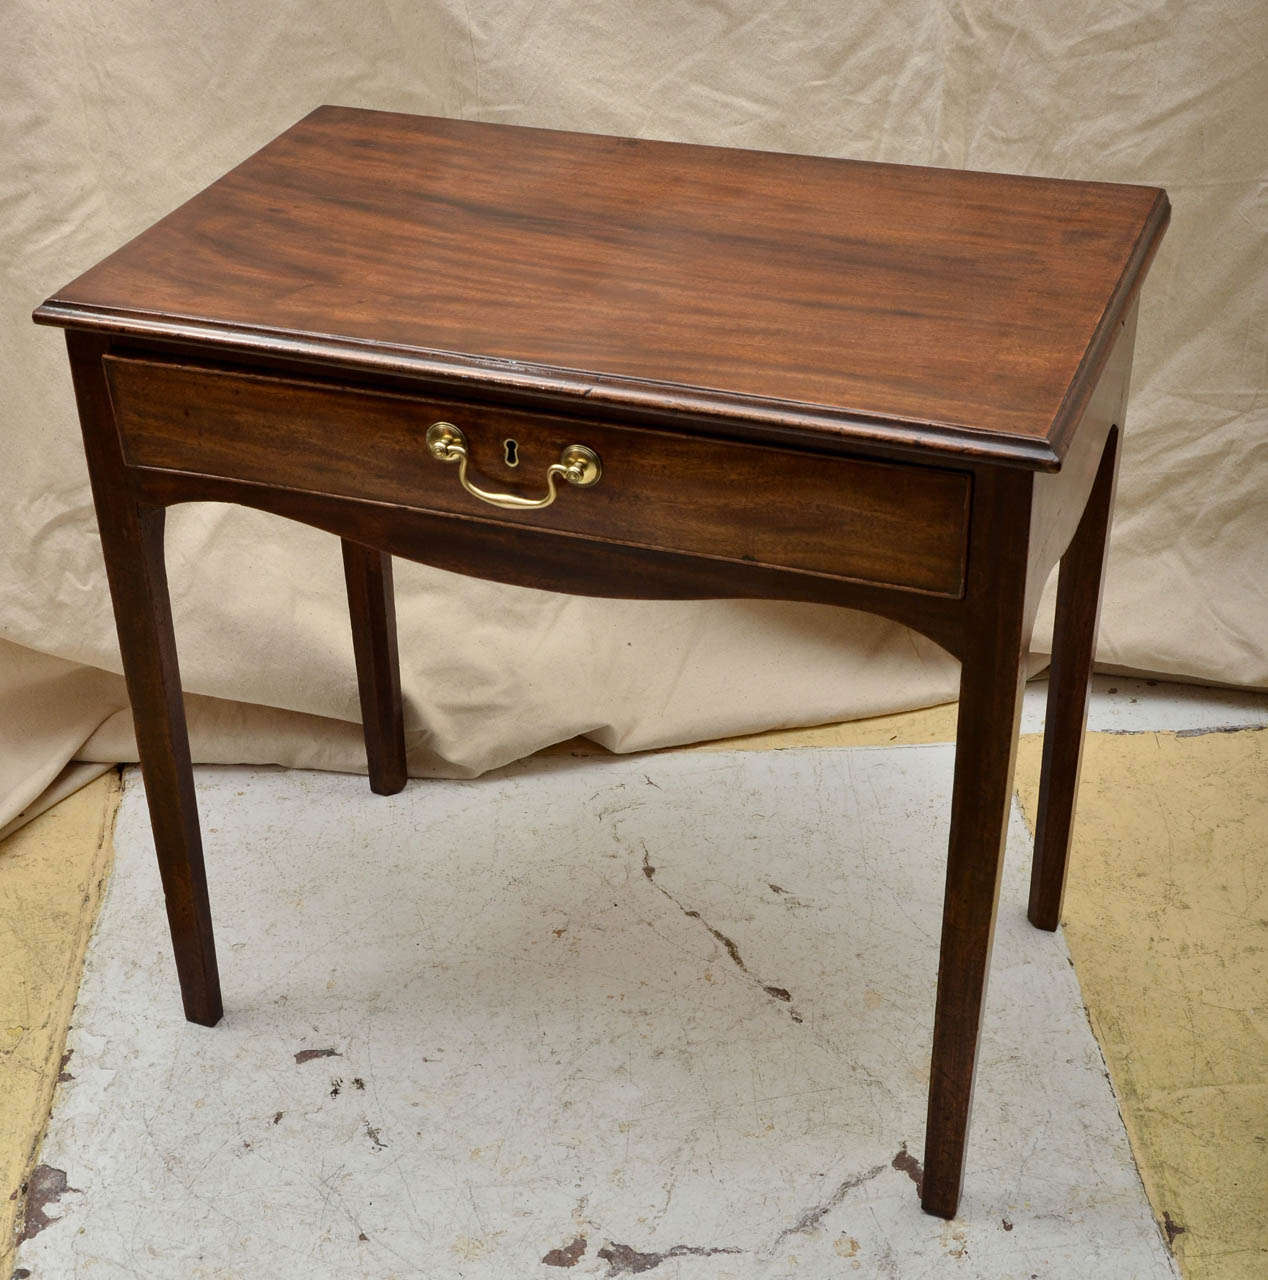 English Geo. 111 Single Drawer Mahogany Side Table With Scalloped Front & Side Apron.  The Drawer Retains It's Original Swan Neck Pull. Great As a Lamp Table Or Small Desk.